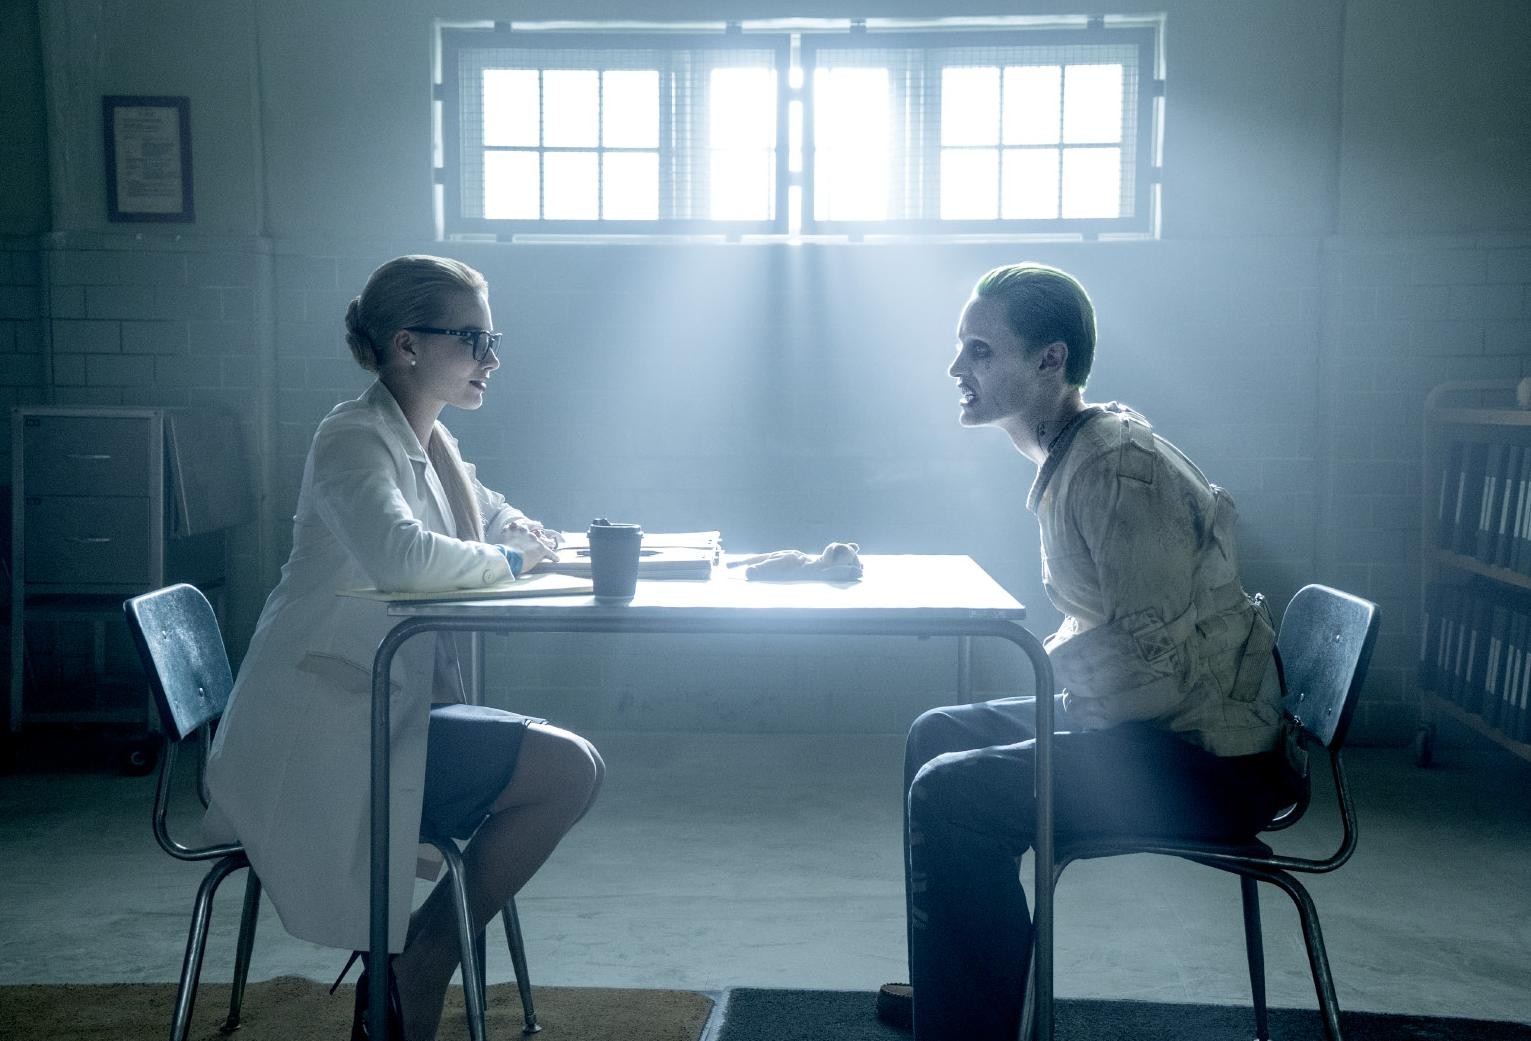 Margot Robbie stras as Dr. Harleen F. Quinzel/Harley Quinn and Jared Leto stars as The Joker in Warner Bros. Pictures' Suicide Squad (2016)